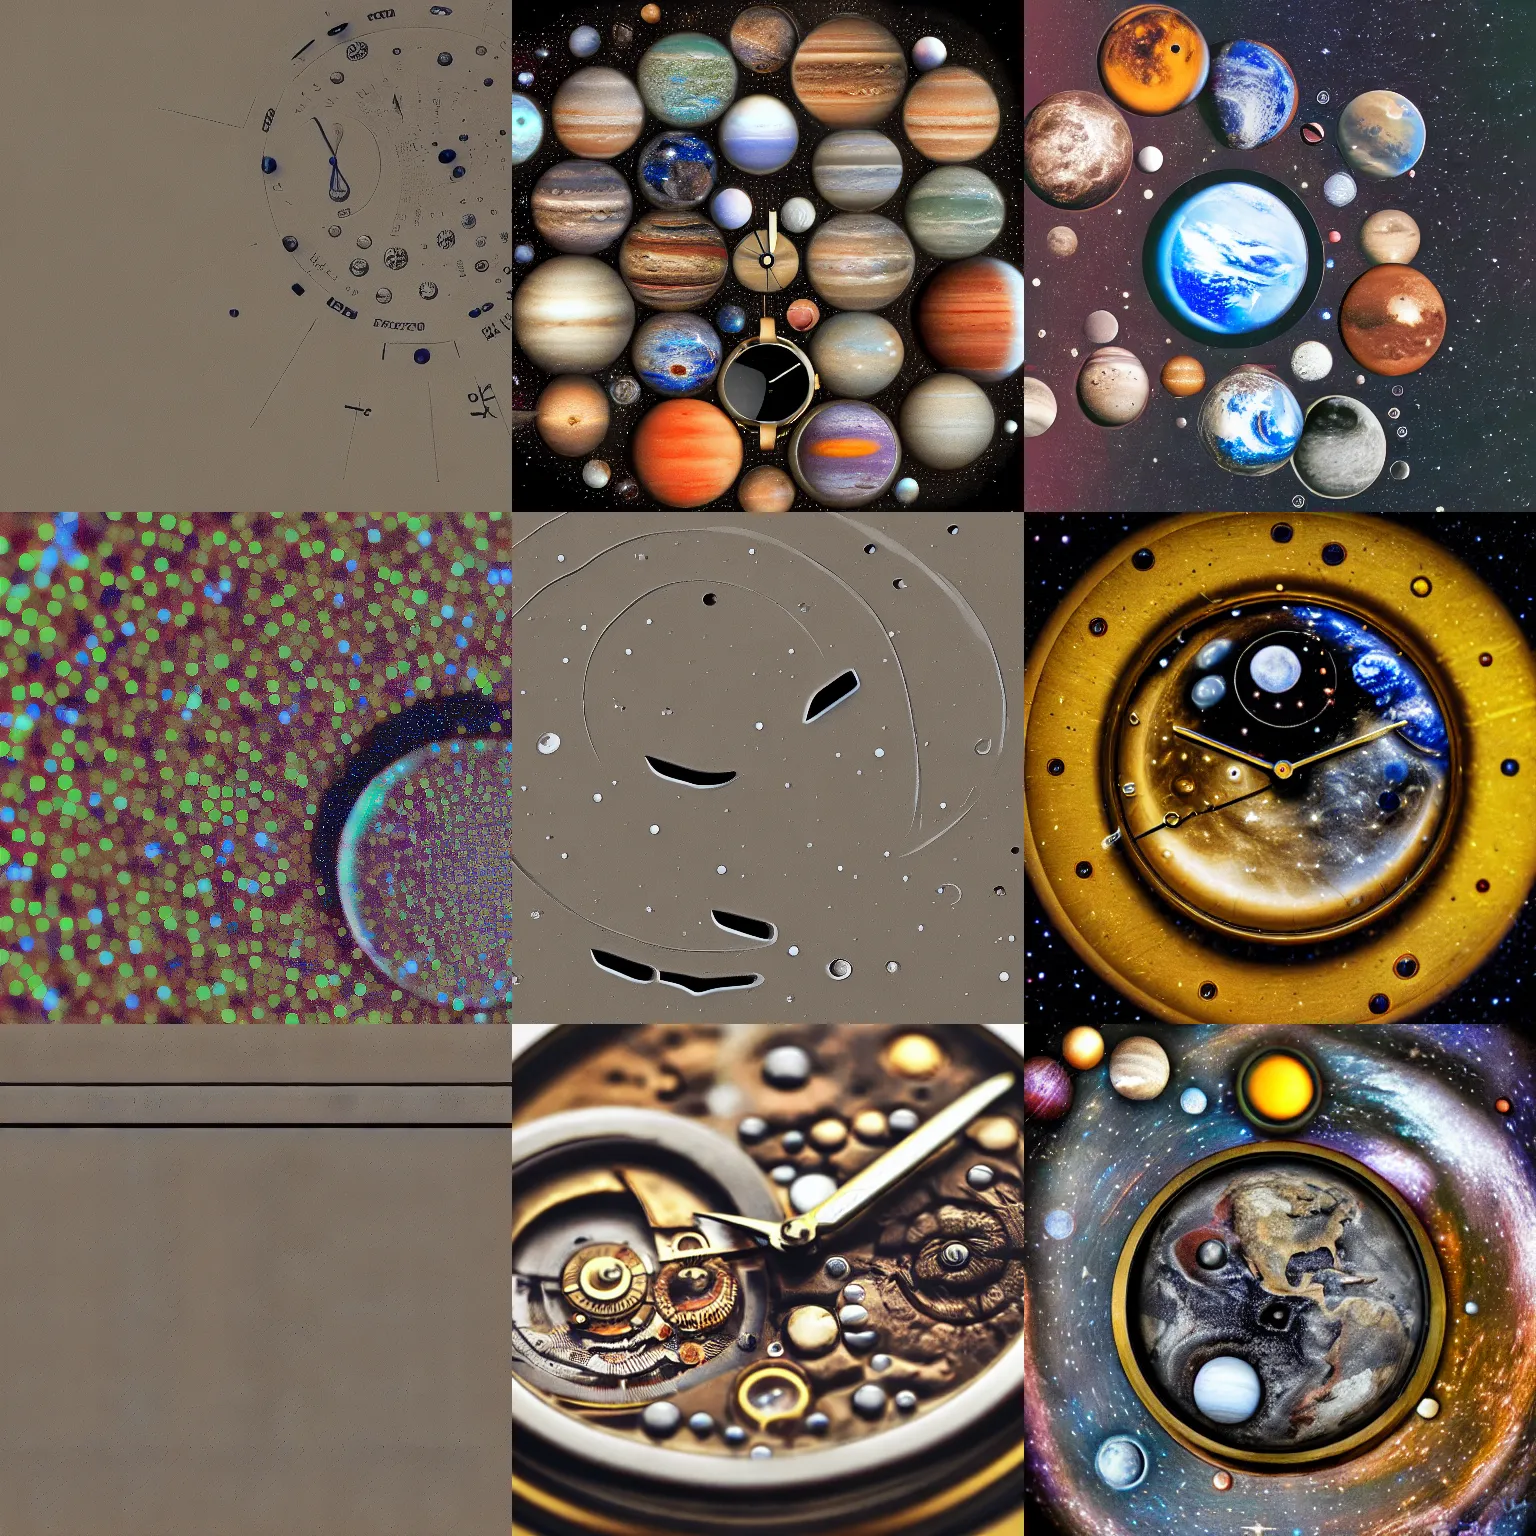 Prompt: Macro photograph of a watch made of planets, moons, miniature cosmos, complexity